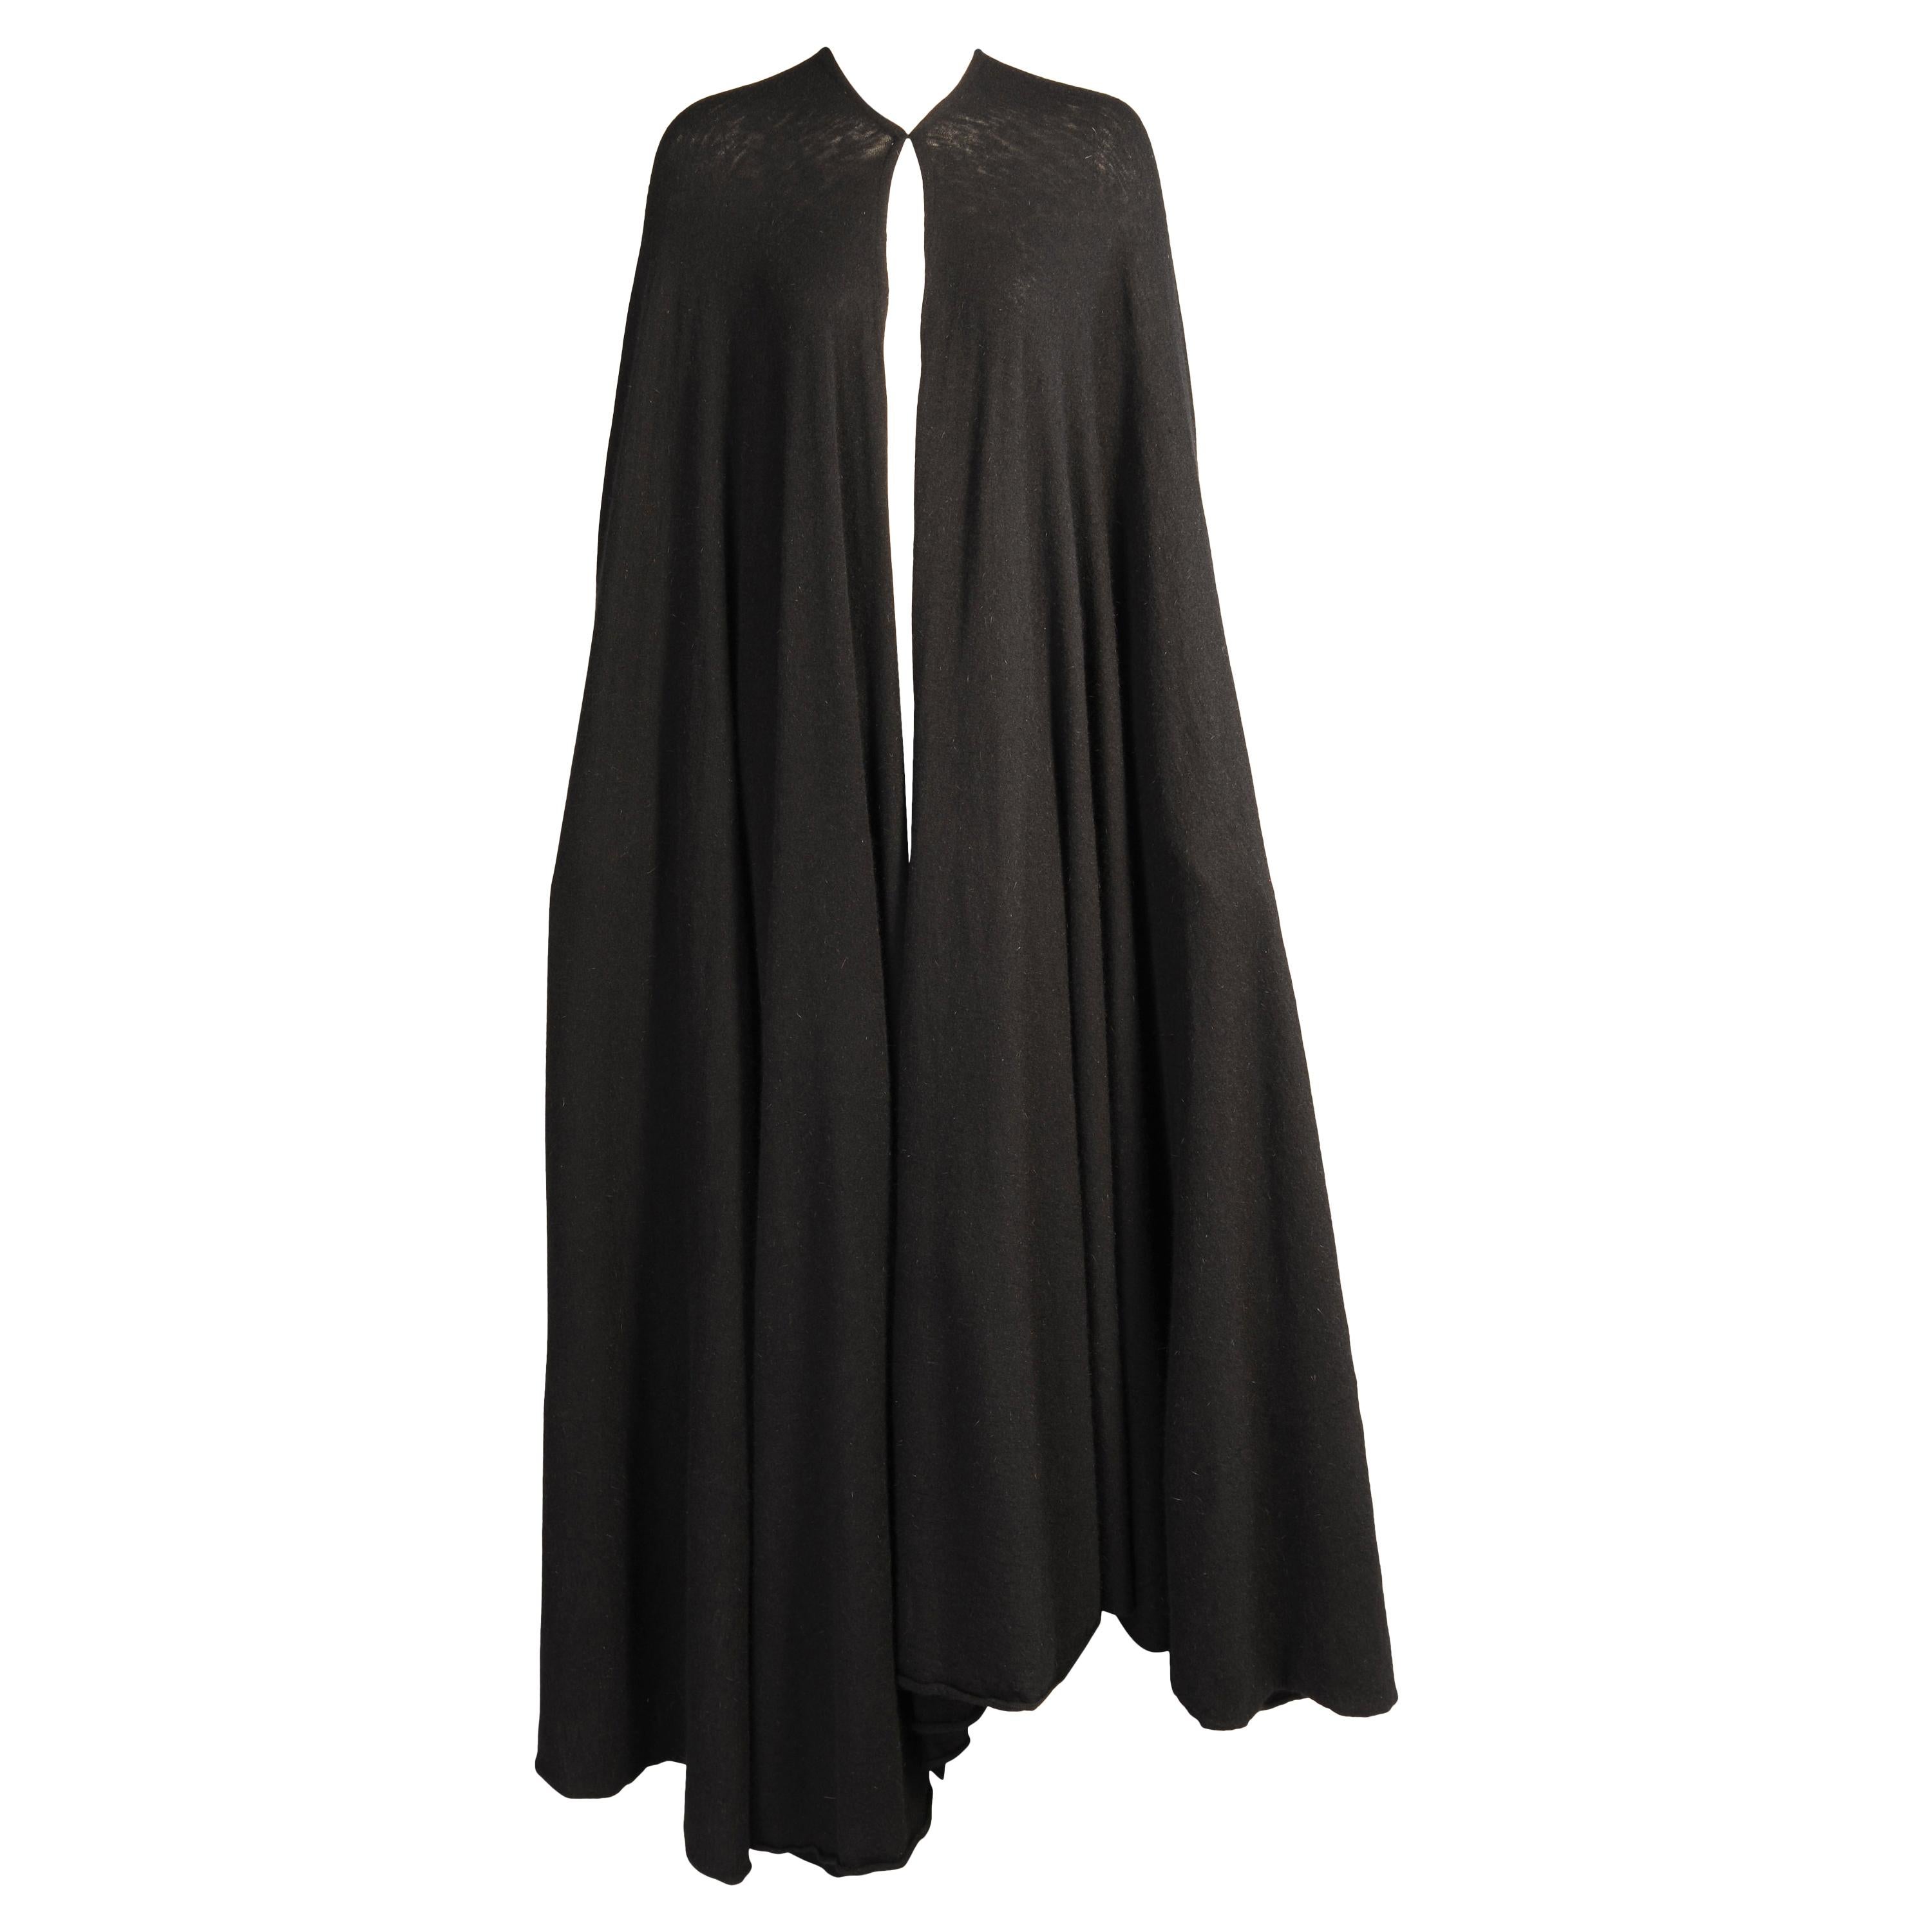 Madame Gres Haute Couture Black Angora and Wool Blend Evening Cape Book Piece